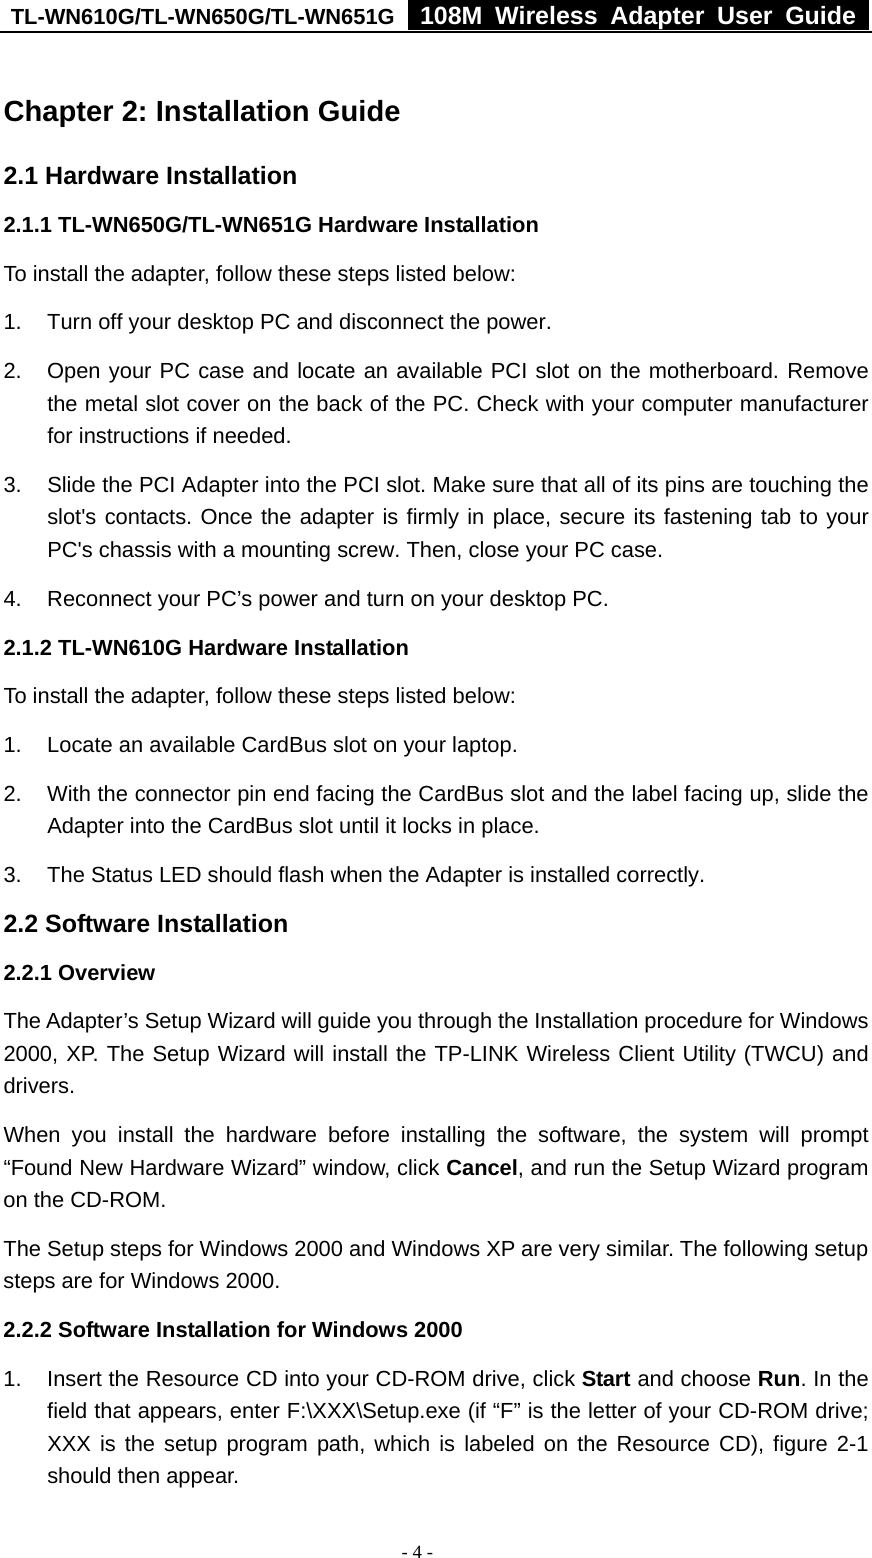 TL-WN610G/TL-WN650G/TL-WN651G  108M Wireless Adapter User Guide  - 4 - Chapter 2: Installation Guide 2.1 Hardware Installation 2.1.1 TL-WN650G/TL-WN651G Hardware Installation To install the adapter, follow these steps listed below: 1.  Turn off your desktop PC and disconnect the power. 2.  Open your PC case and locate an available PCI slot on the motherboard. Remove the metal slot cover on the back of the PC. Check with your computer manufacturer for instructions if needed. 3.  Slide the PCI Adapter into the PCI slot. Make sure that all of its pins are touching the slot&apos;s contacts. Once the adapter is firmly in place, secure its fastening tab to your PC&apos;s chassis with a mounting screw. Then, close your PC case. 4.  Reconnect your PC’s power and turn on your desktop PC. 2.1.2 TL-WN610G Hardware Installation To install the adapter, follow these steps listed below: 1.  Locate an available CardBus slot on your laptop.   2.  With the connector pin end facing the CardBus slot and the label facing up, slide the Adapter into the CardBus slot until it locks in place. 3.  The Status LED should flash when the Adapter is installed correctly. 2.2 Software Installation 2.2.1 Overview The Adapter’s Setup Wizard will guide you through the Installation procedure for Windows 2000, XP. The Setup Wizard will install the TP-LINK Wireless Client Utility (TWCU) and drivers. When you install the hardware before installing the software, the system will prompt “Found New Hardware Wizard” window, click Cancel, and run the Setup Wizard program on the CD-ROM.   The Setup steps for Windows 2000 and Windows XP are very similar. The following setup steps are for Windows 2000. 2.2.2 Software Installation for Windows 2000 1.  Insert the Resource CD into your CD-ROM drive, click Start and choose Run. In the field that appears, enter F:\XXX\Setup.exe (if “F” is the letter of your CD-ROM drive; XXX is the setup program path, which is labeled on the Resource CD), figure 2-1 should then appear.   